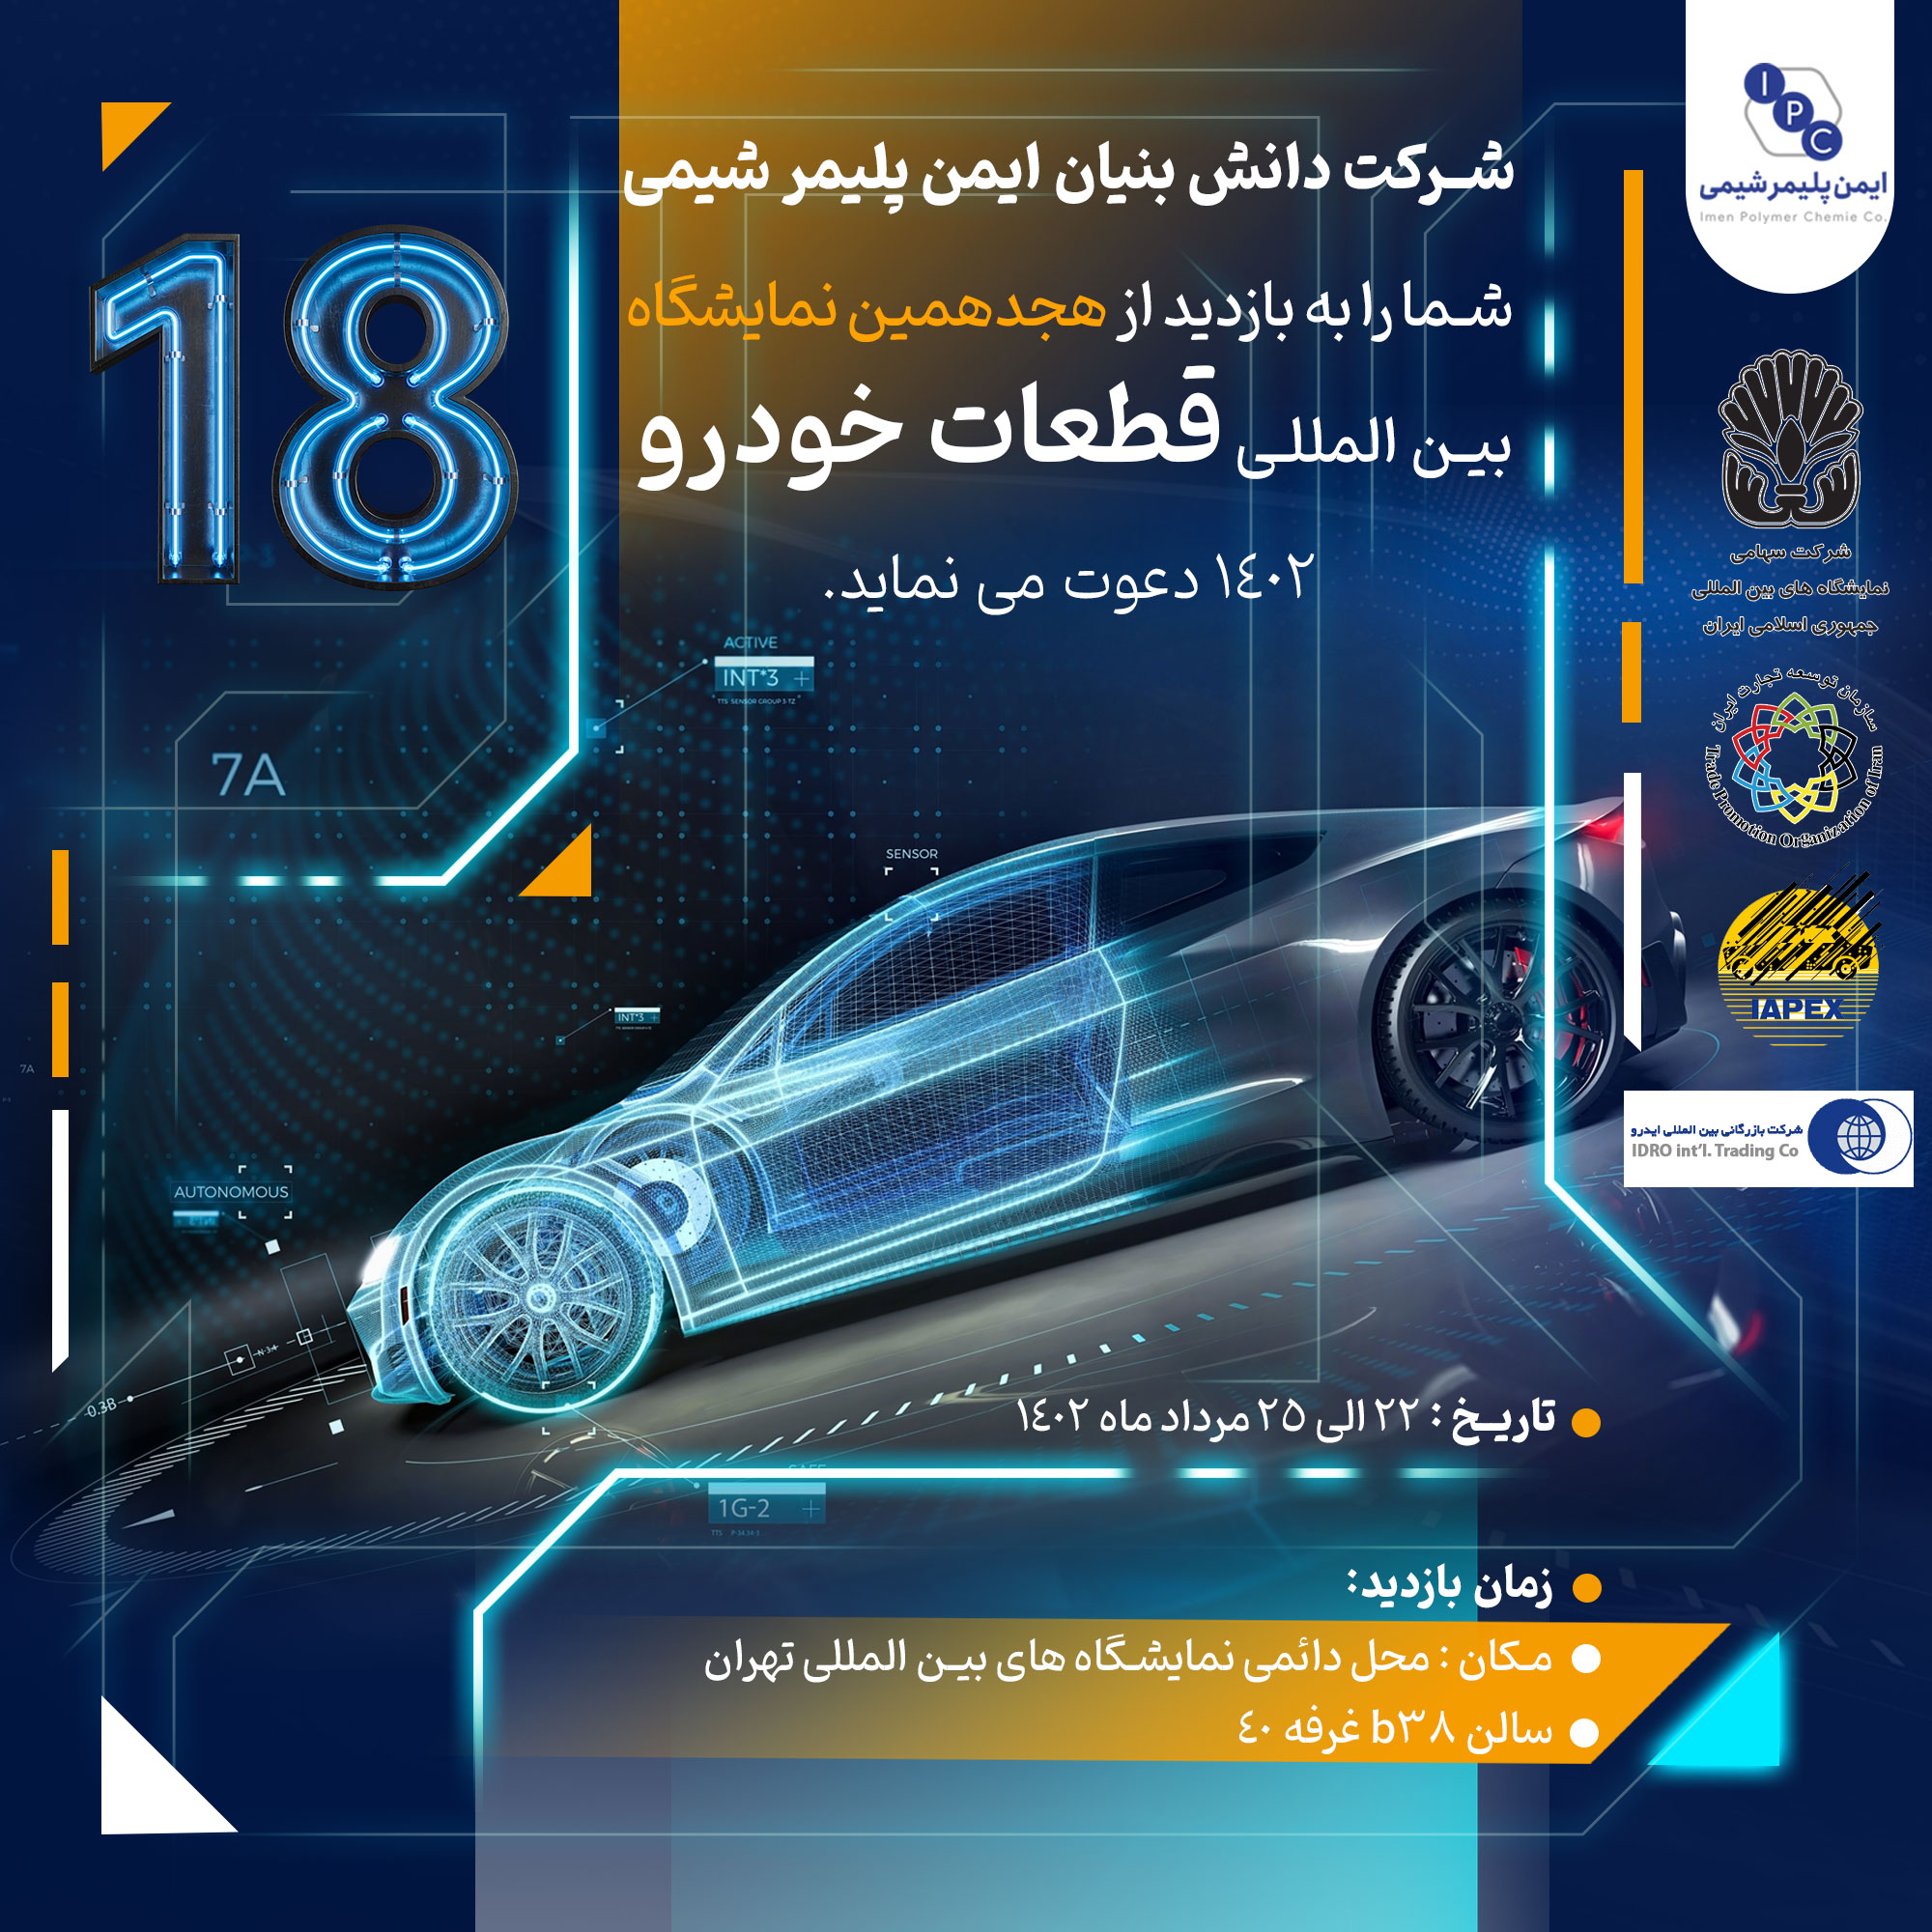 The 18th International Auto Parts Exhibition